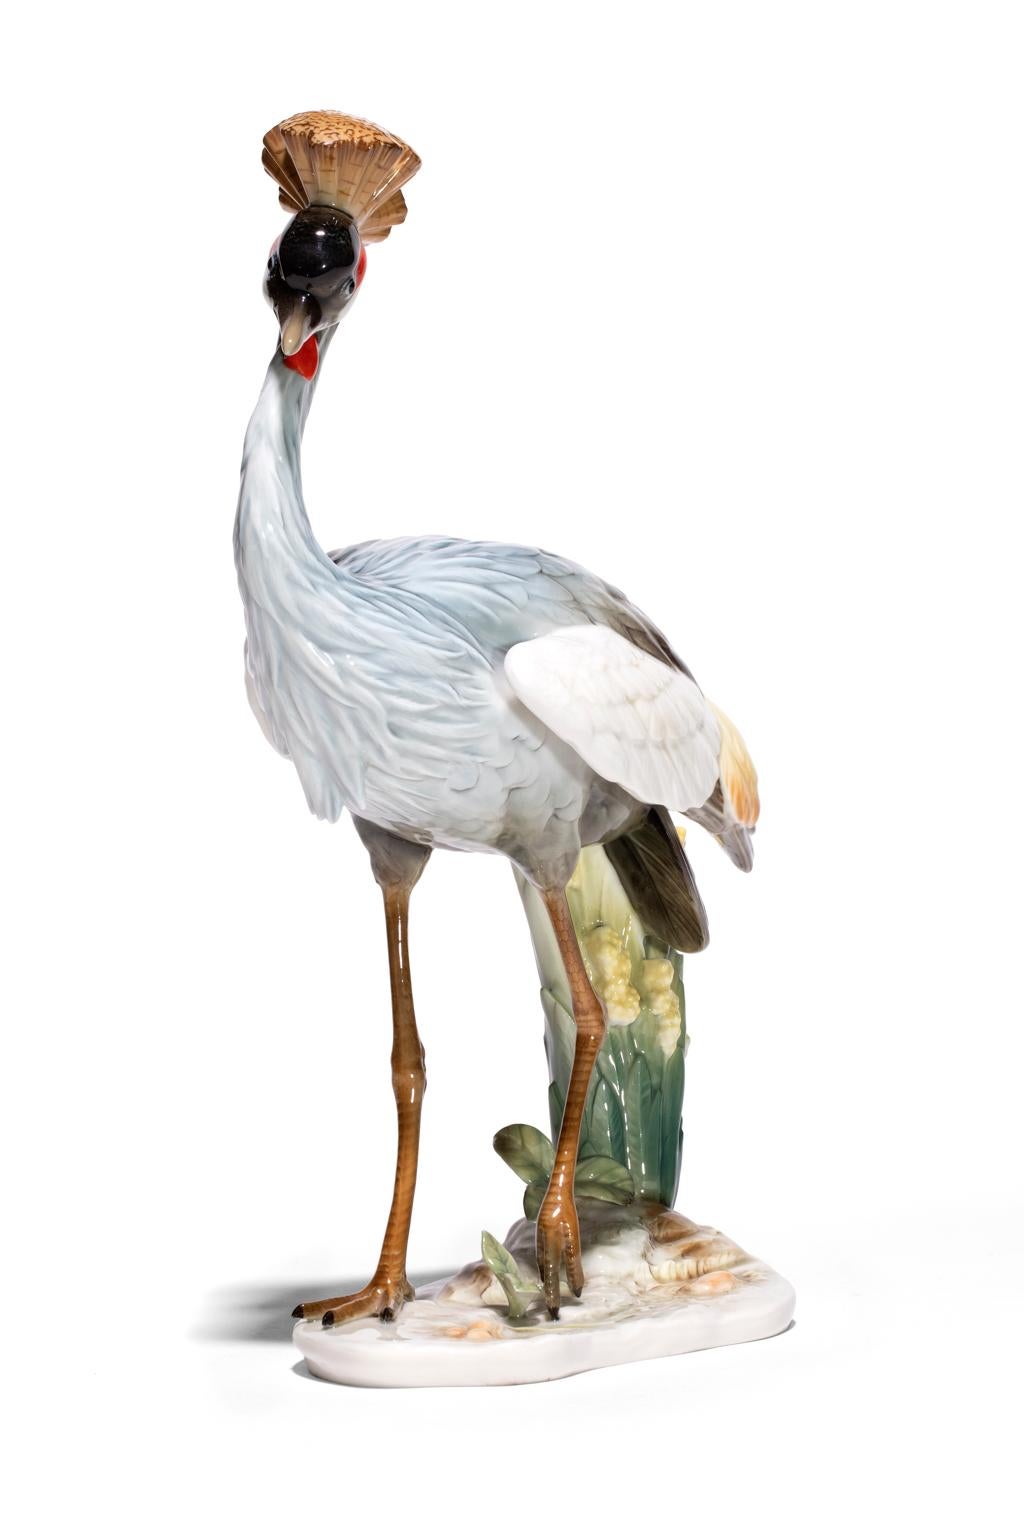 The Crowned Crane by Hutschenreuther- Selb is a richly rendered glaze painted in blue grays, maroon, pale yellow, brown and delicately rendered green foliage. In incised marks of the feathers and crown contribute to the overall precious quality of